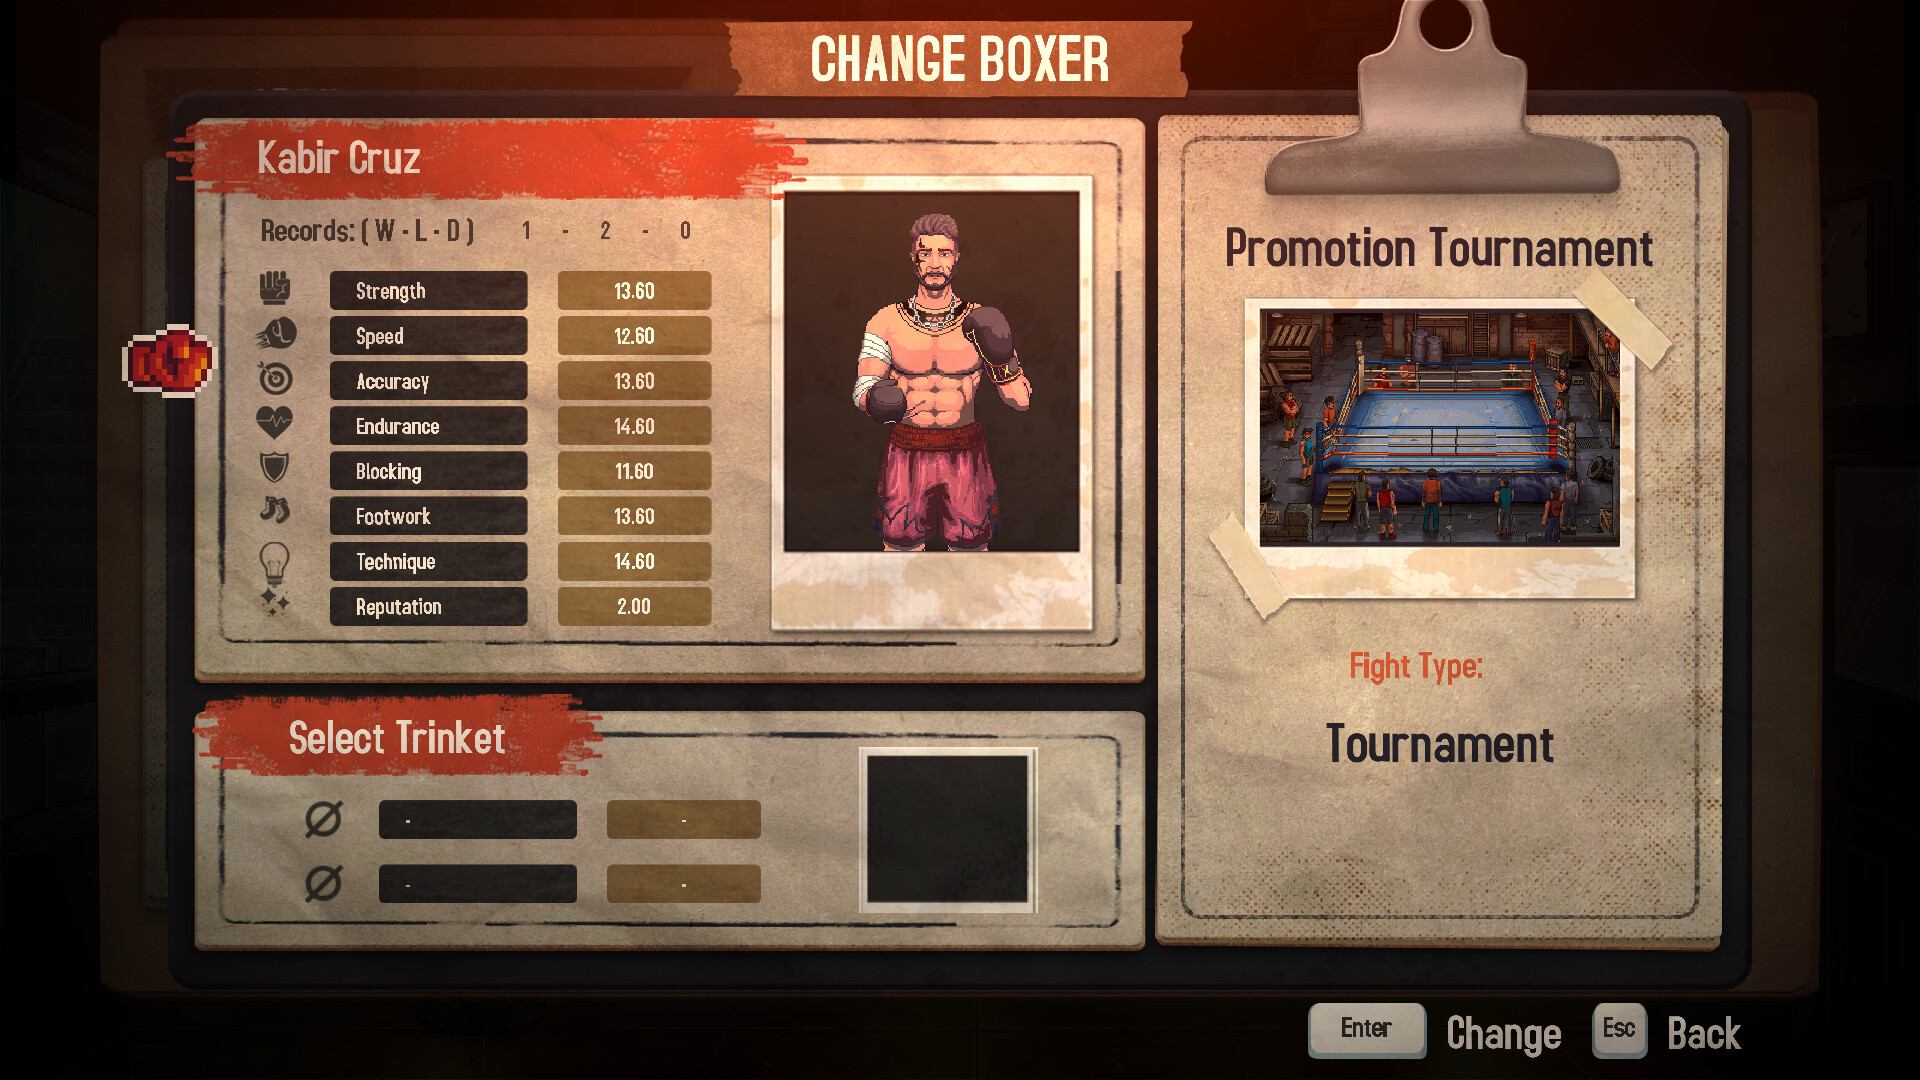 2023 - World Championship Boxing Manager 2 is available, our impressions